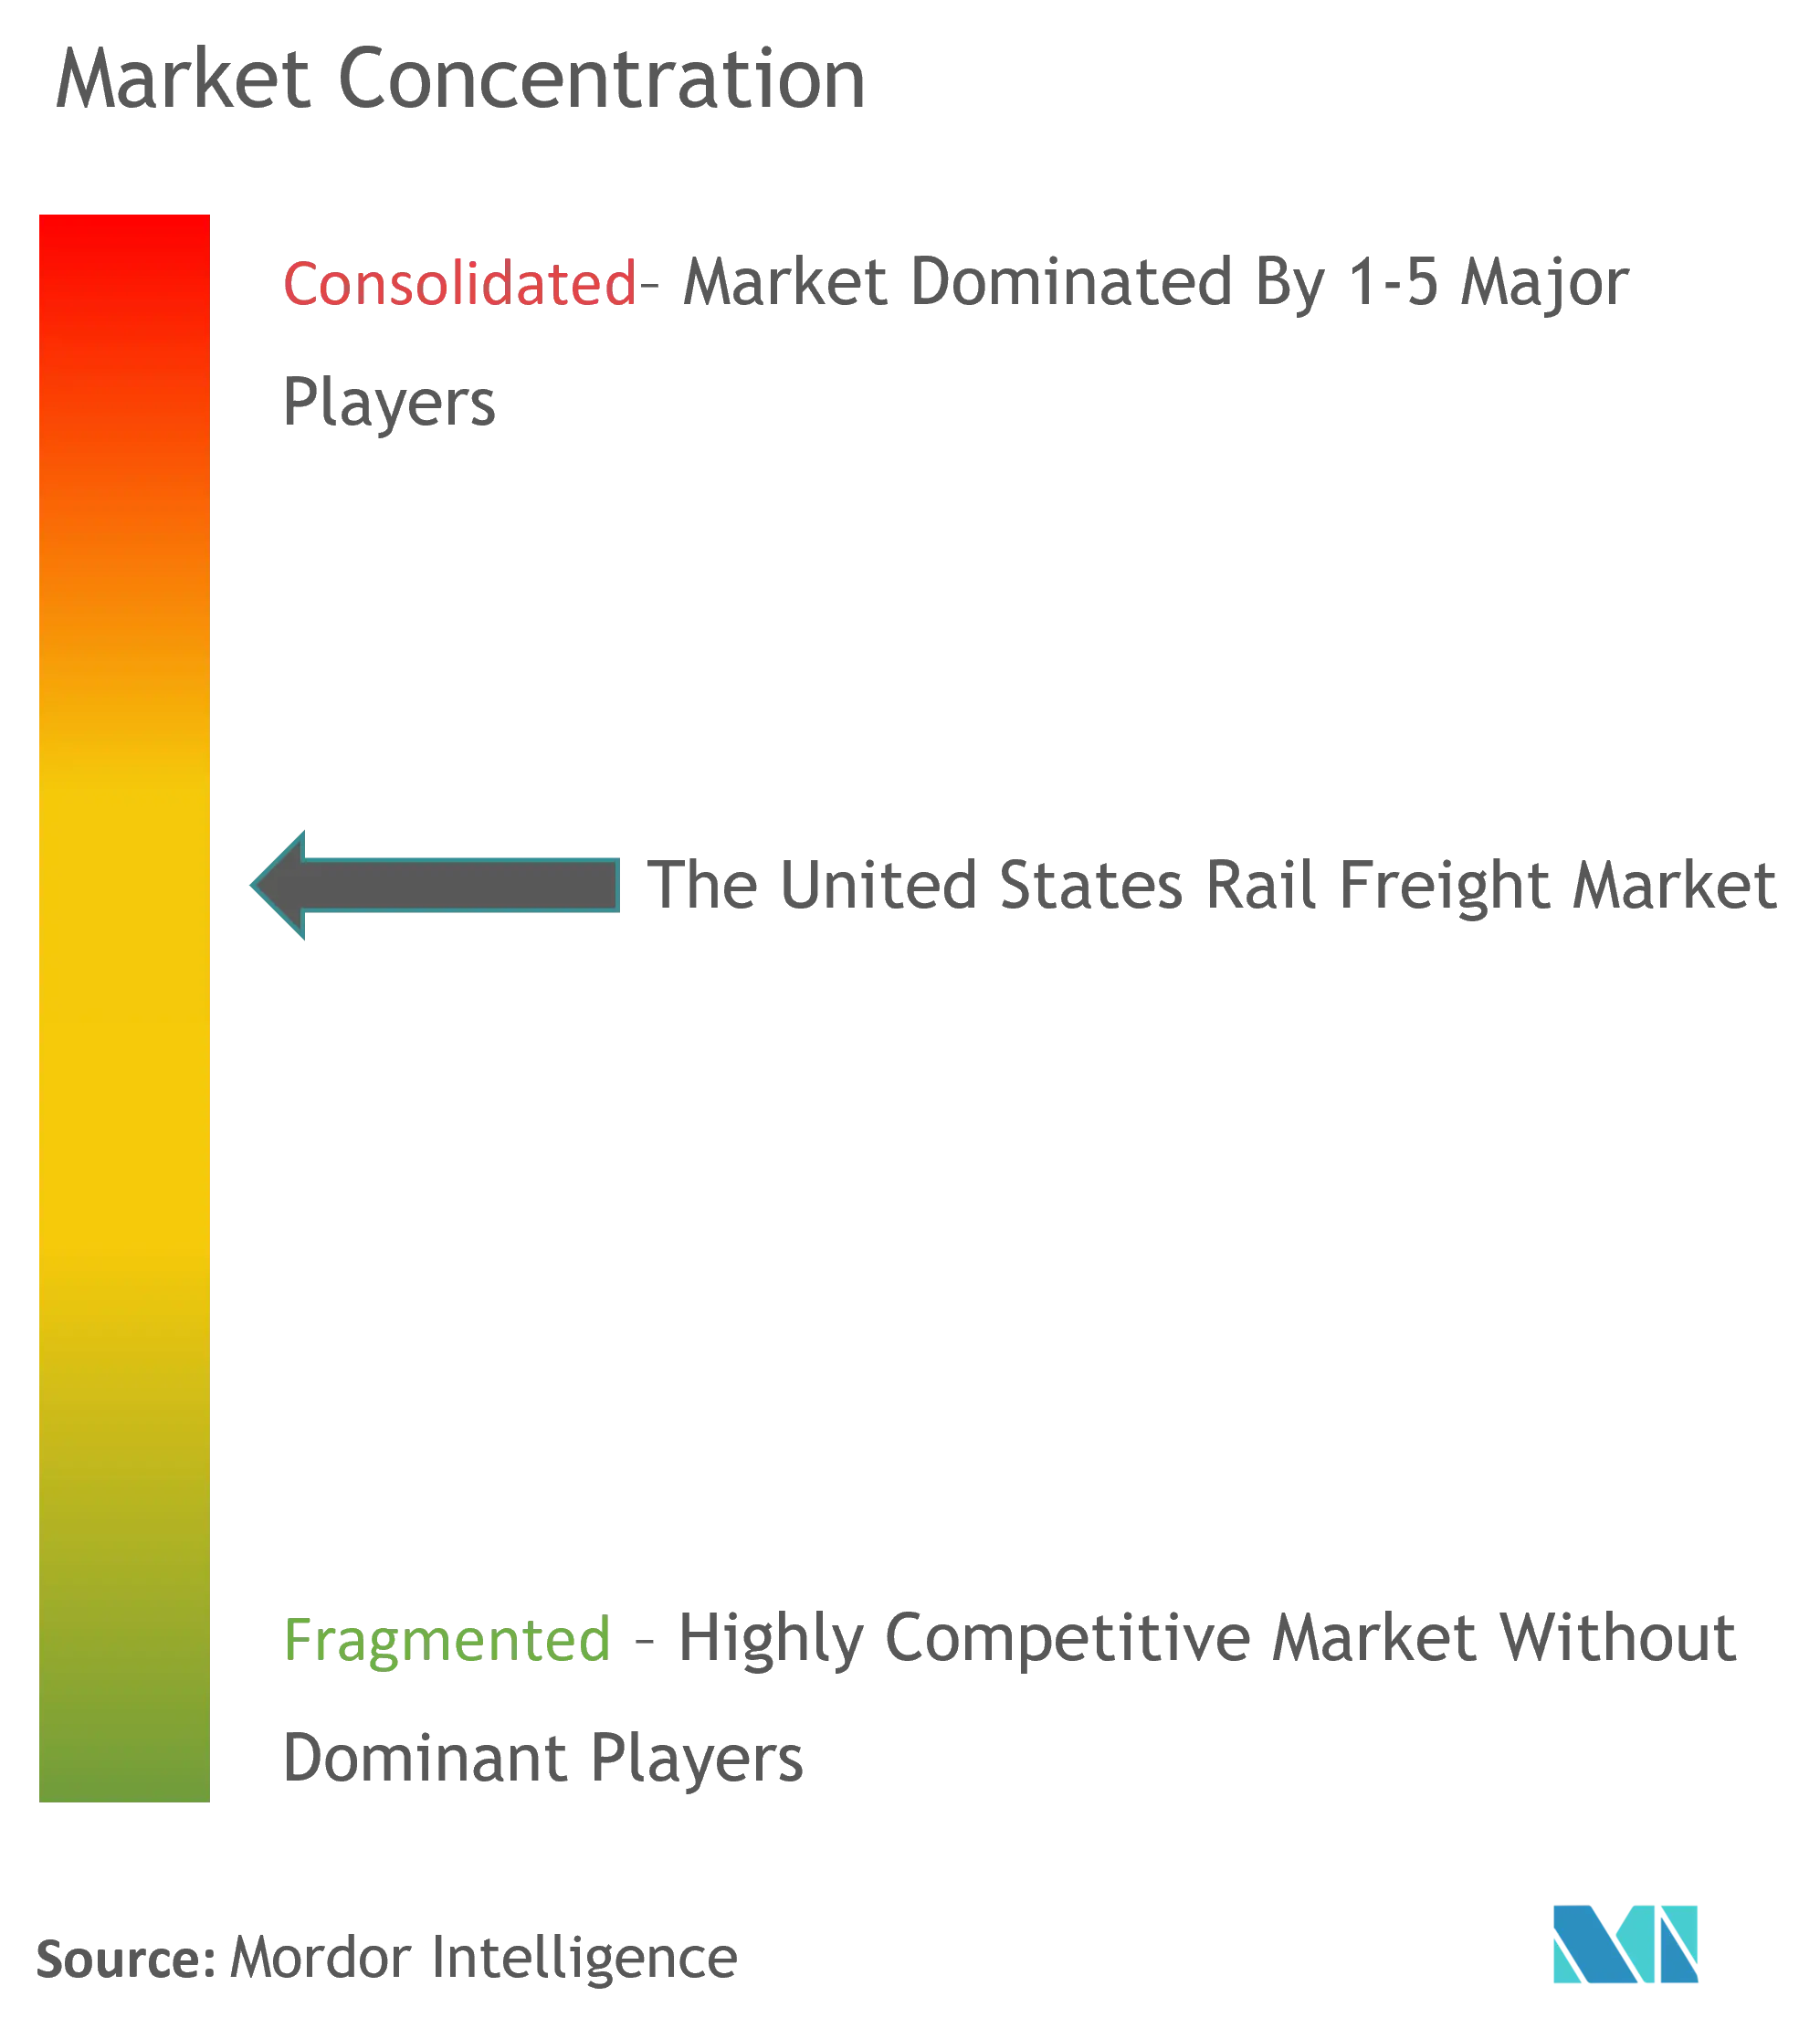 United States Rail Freight Transport Market Concentration